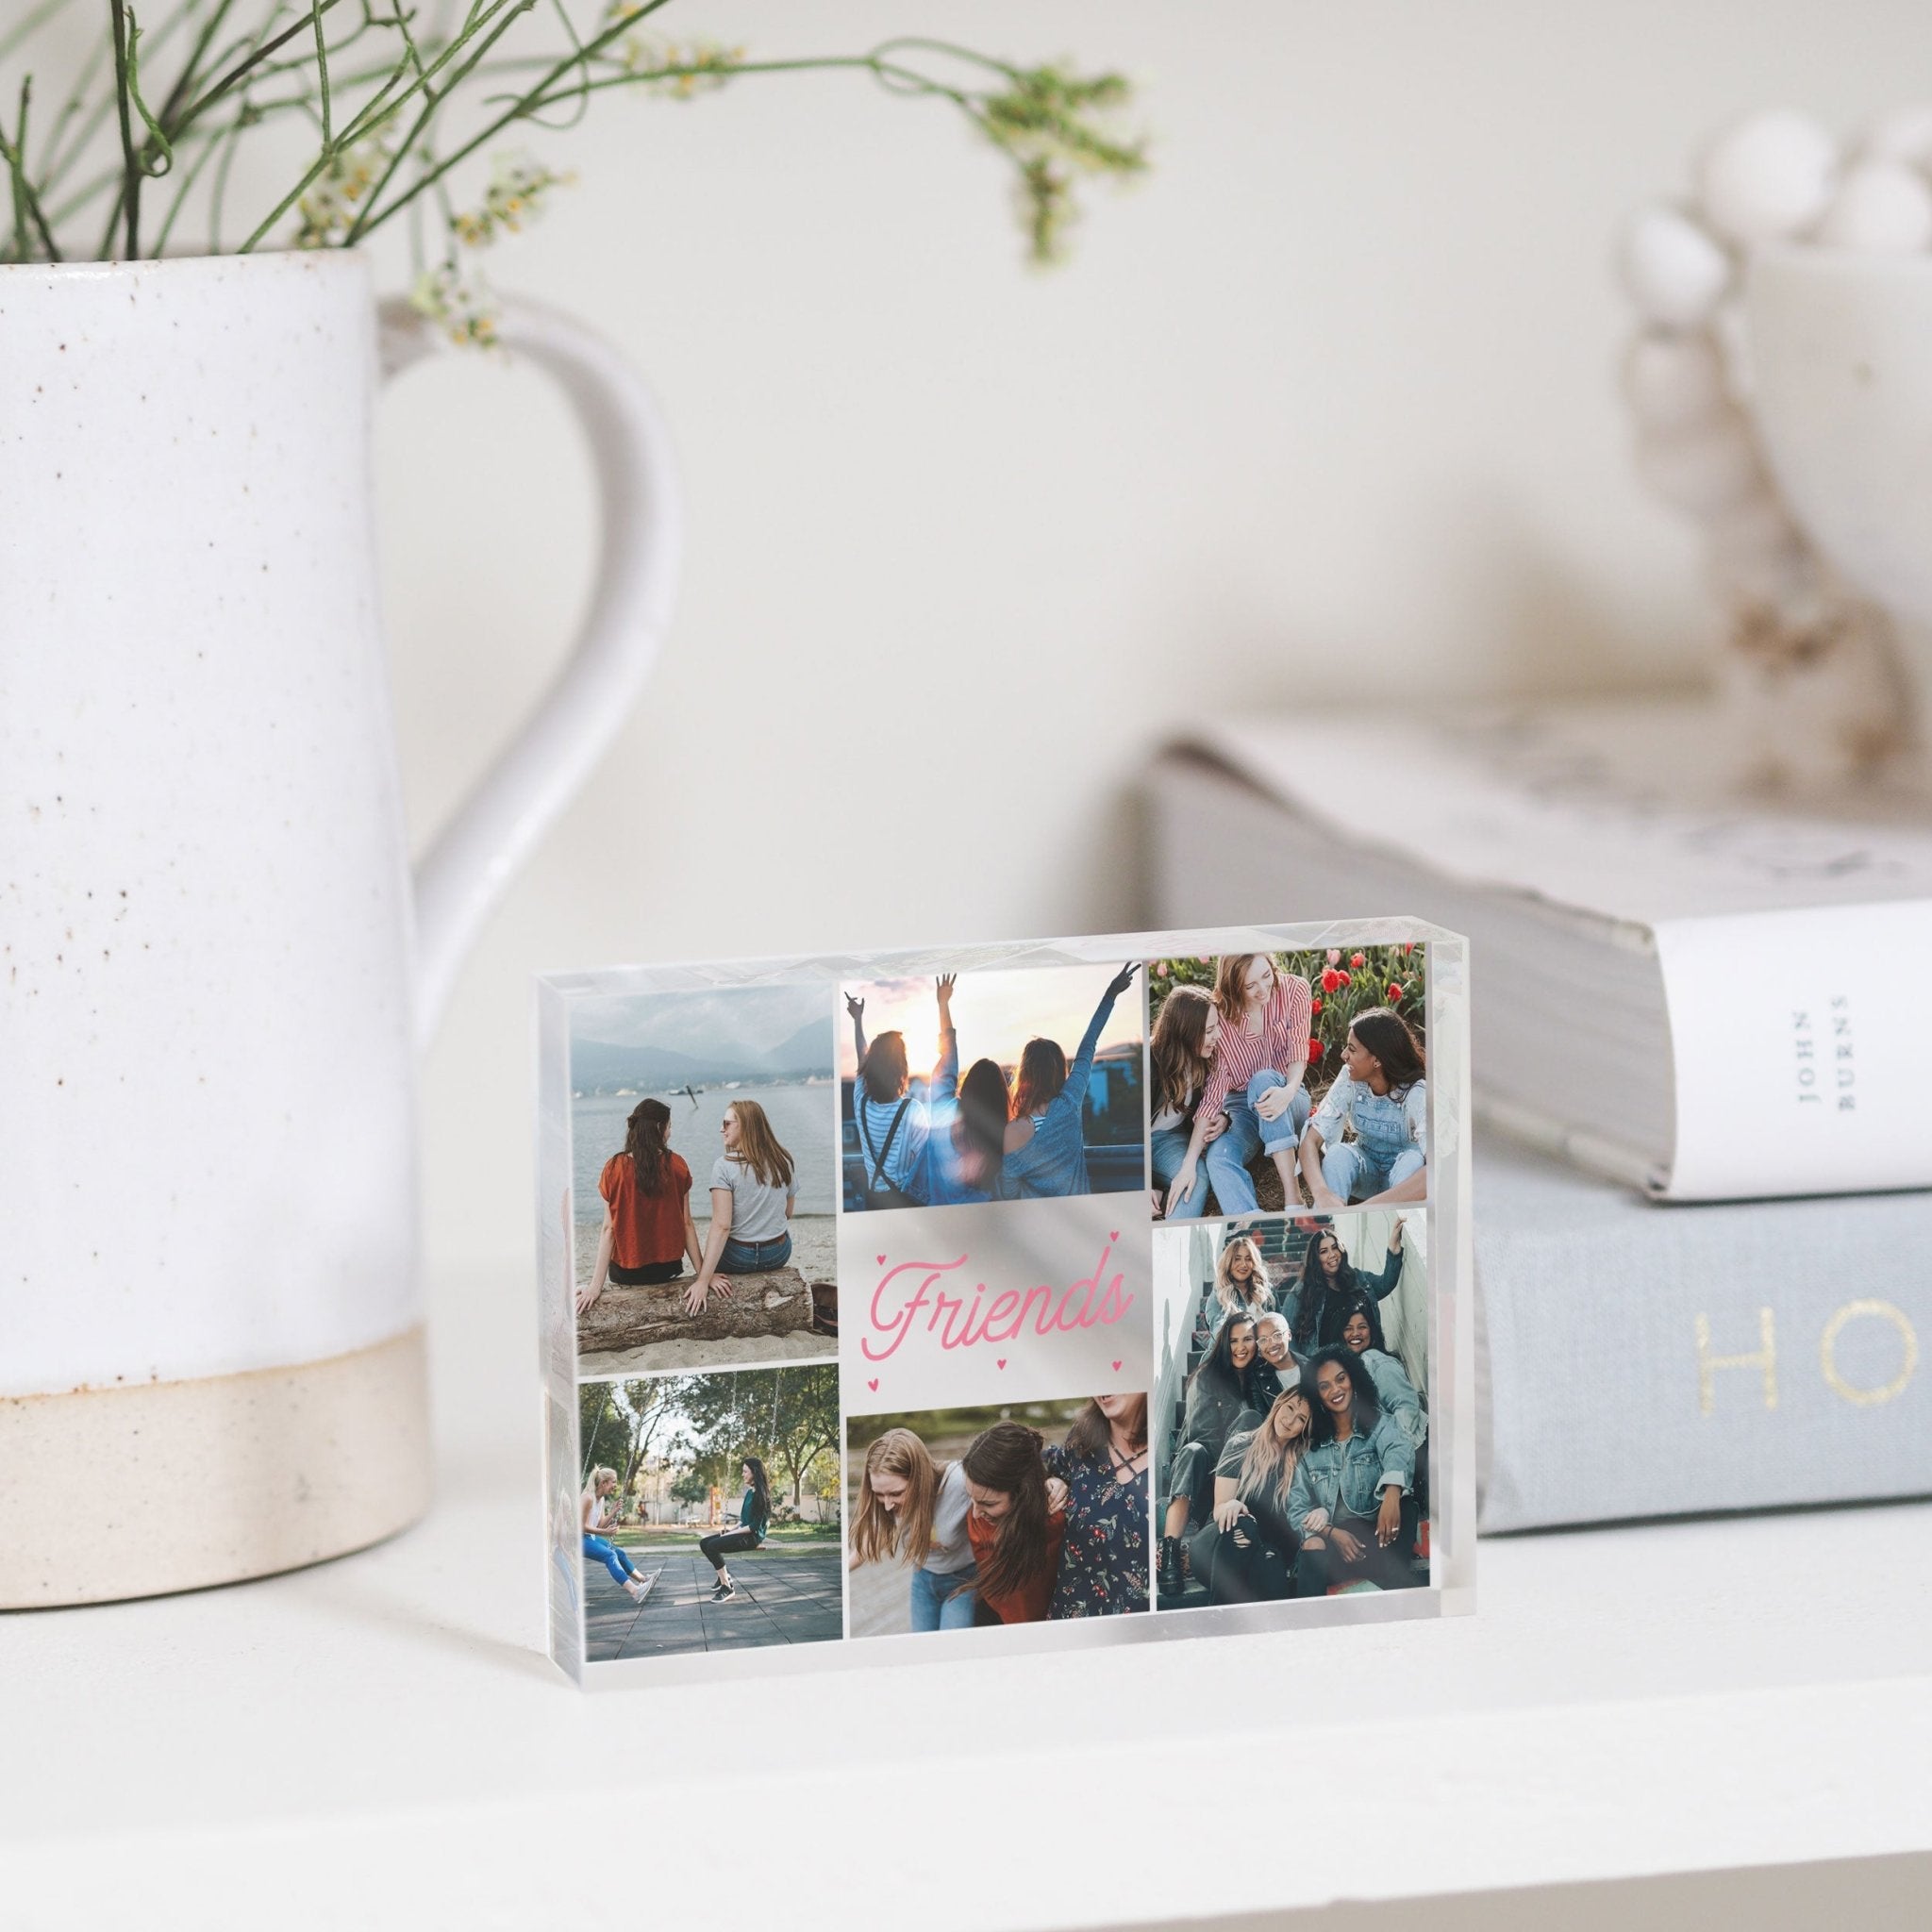 Best Friend Birthday Gift | Sister Gift | Photo Frame For Her PhotoBlock - Unique Prints